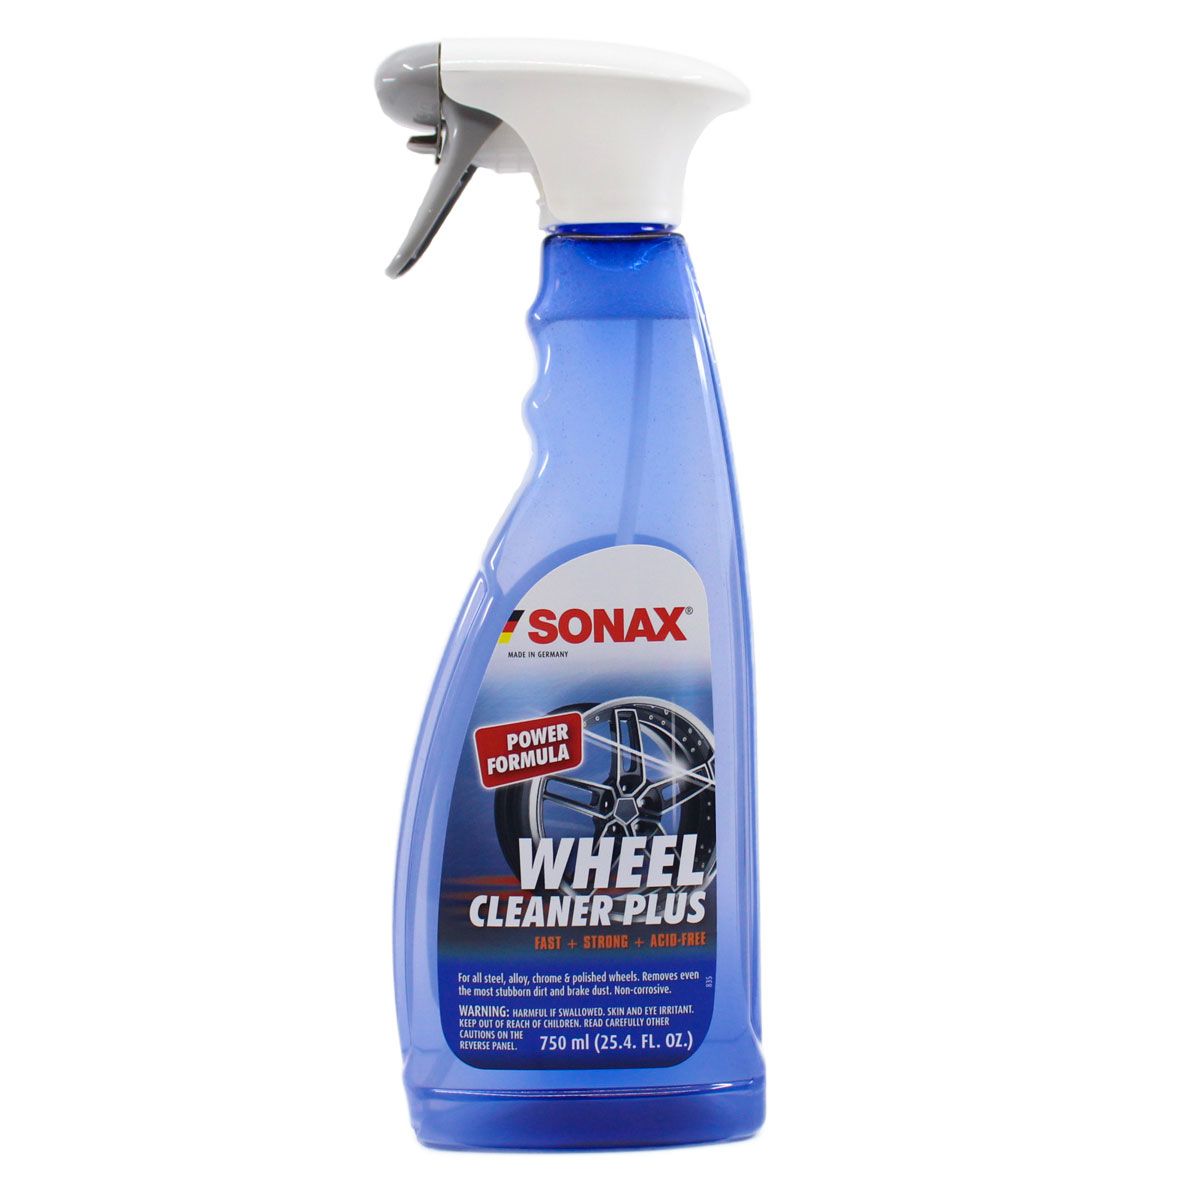 SONAX Glass Cleaner